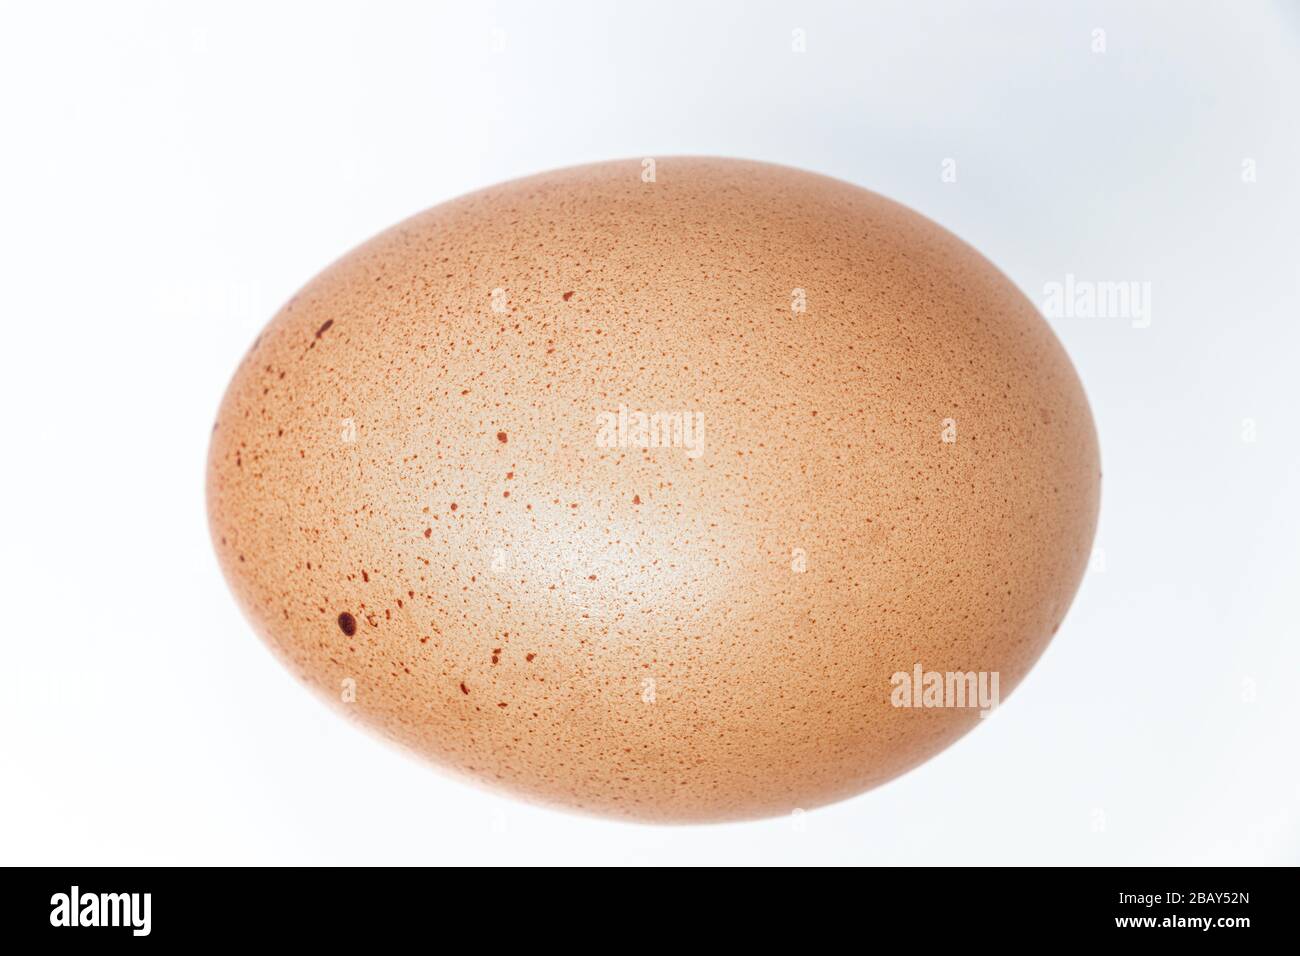 Organic farm egg isolated on white background. Chickens egg from ecologically clean areas Stock Photo